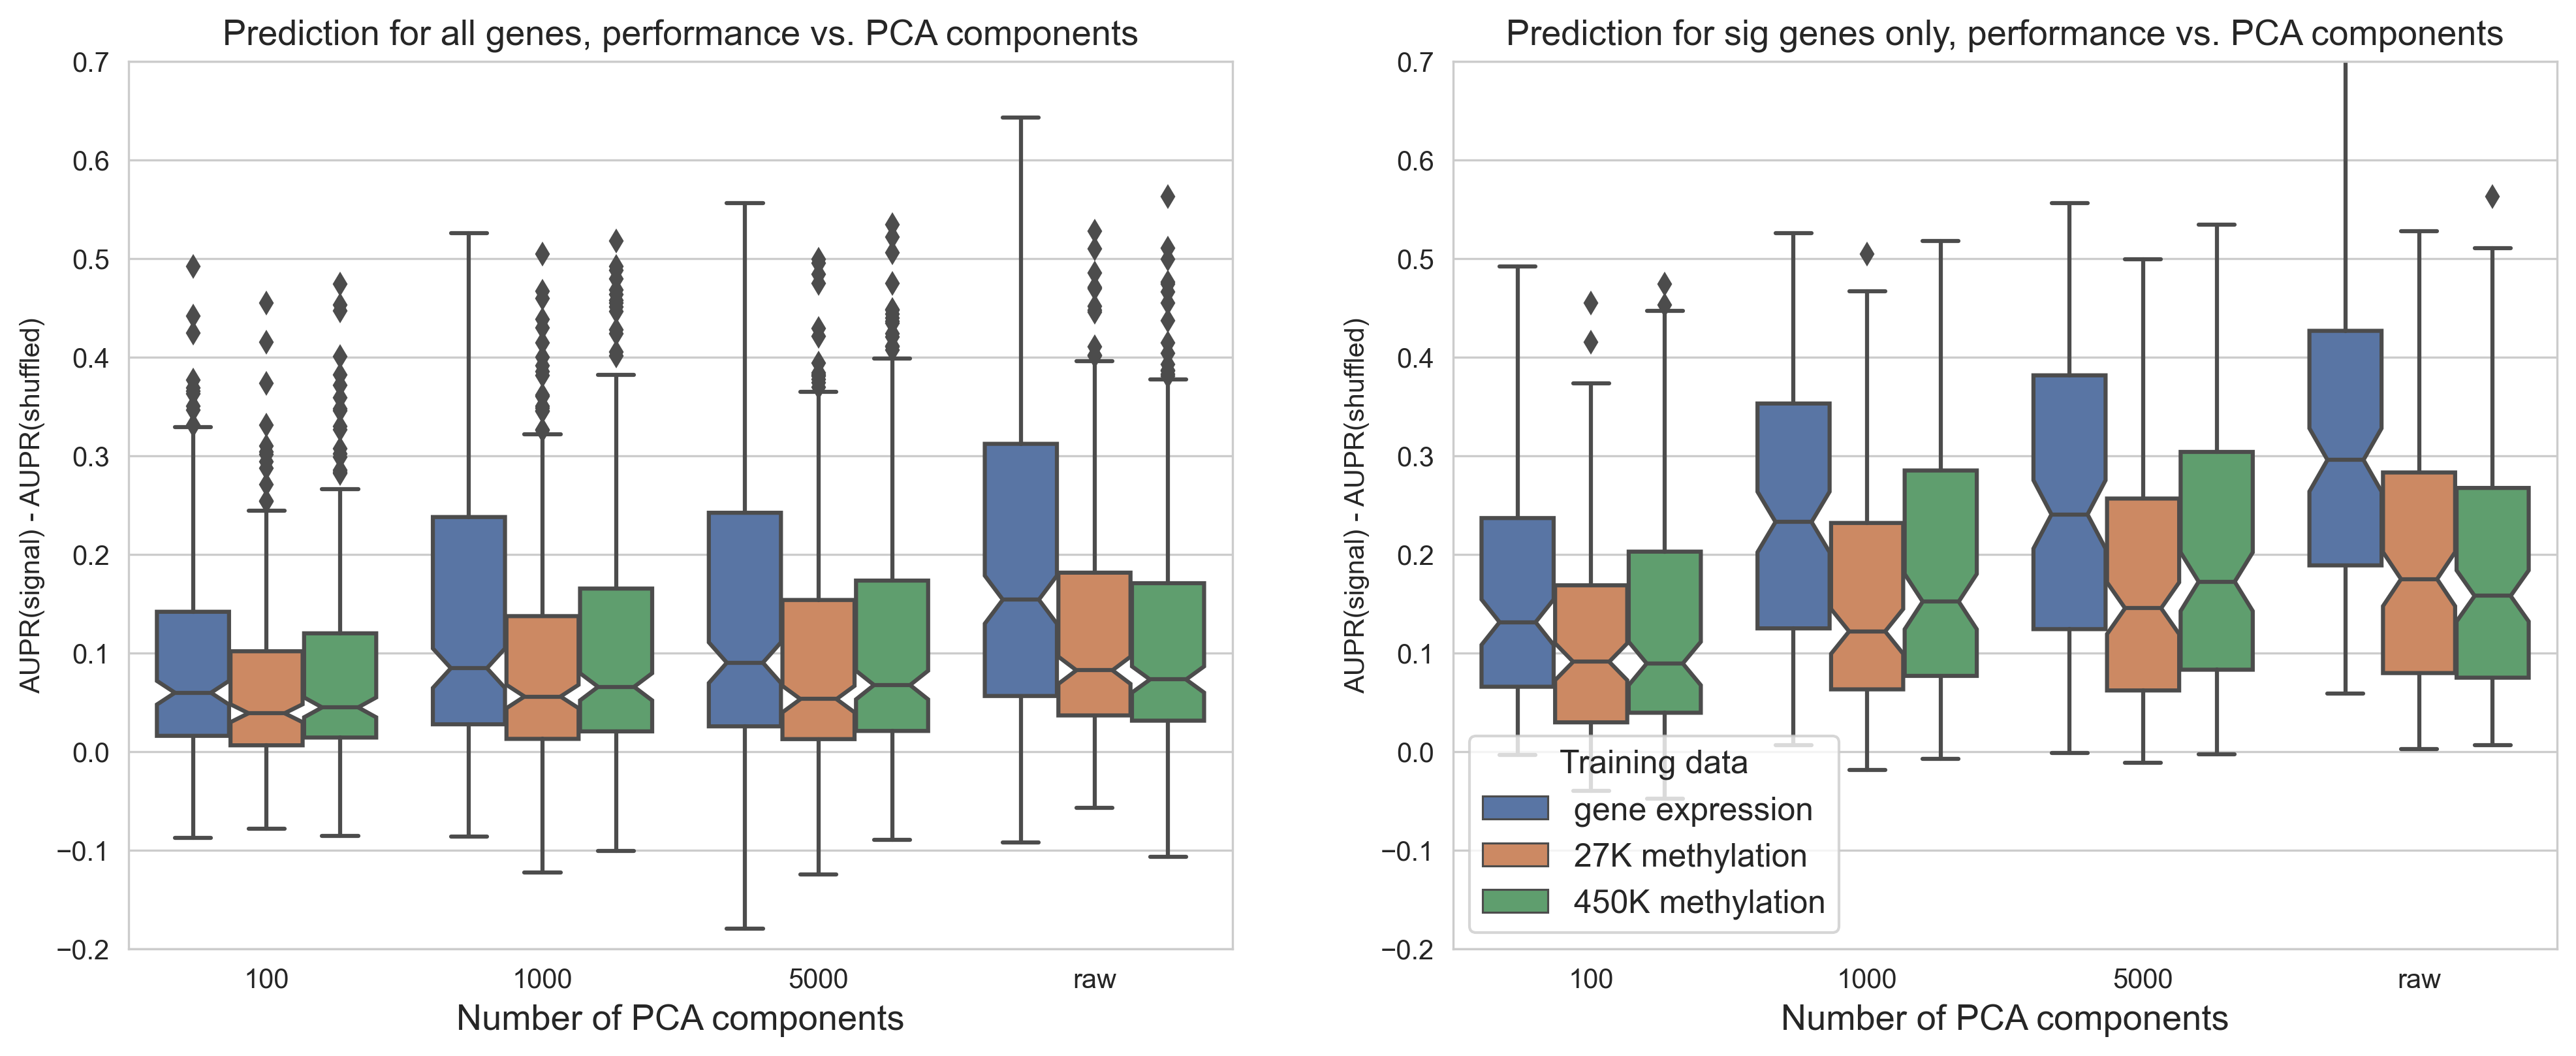 Figure 12: Predictive performance for genes in the cancer-related gene set, using each of the three data types as predictors. The x-axis shows the number of PCA components used as features, “raw” = no PCA compression.